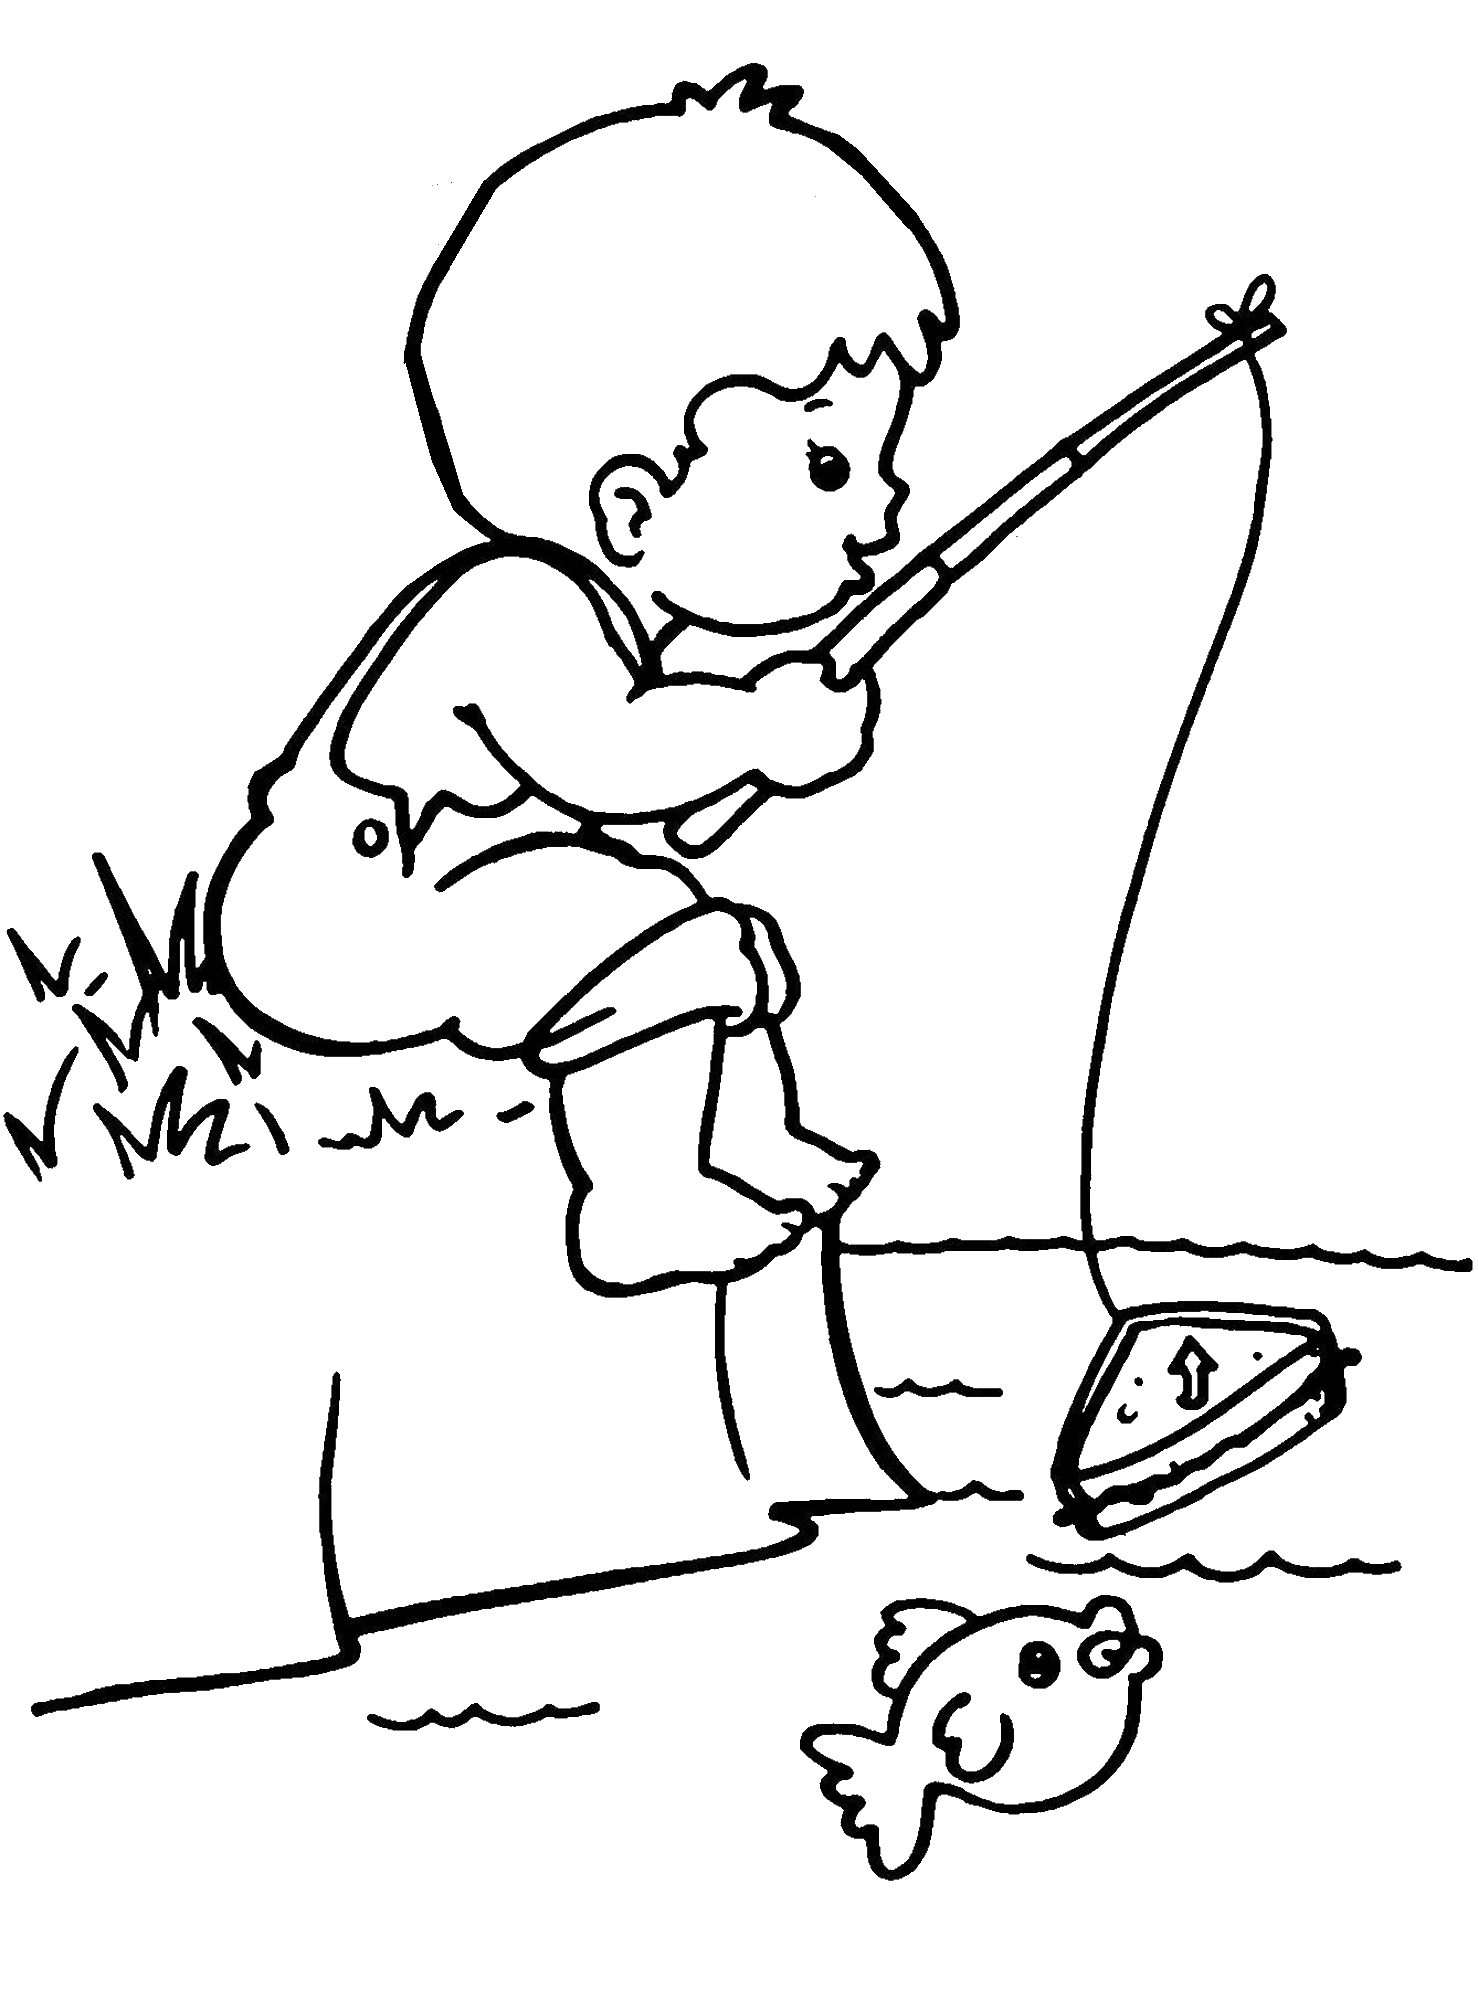 Eating ice cream coloring page on girl and boy skating coloring page.